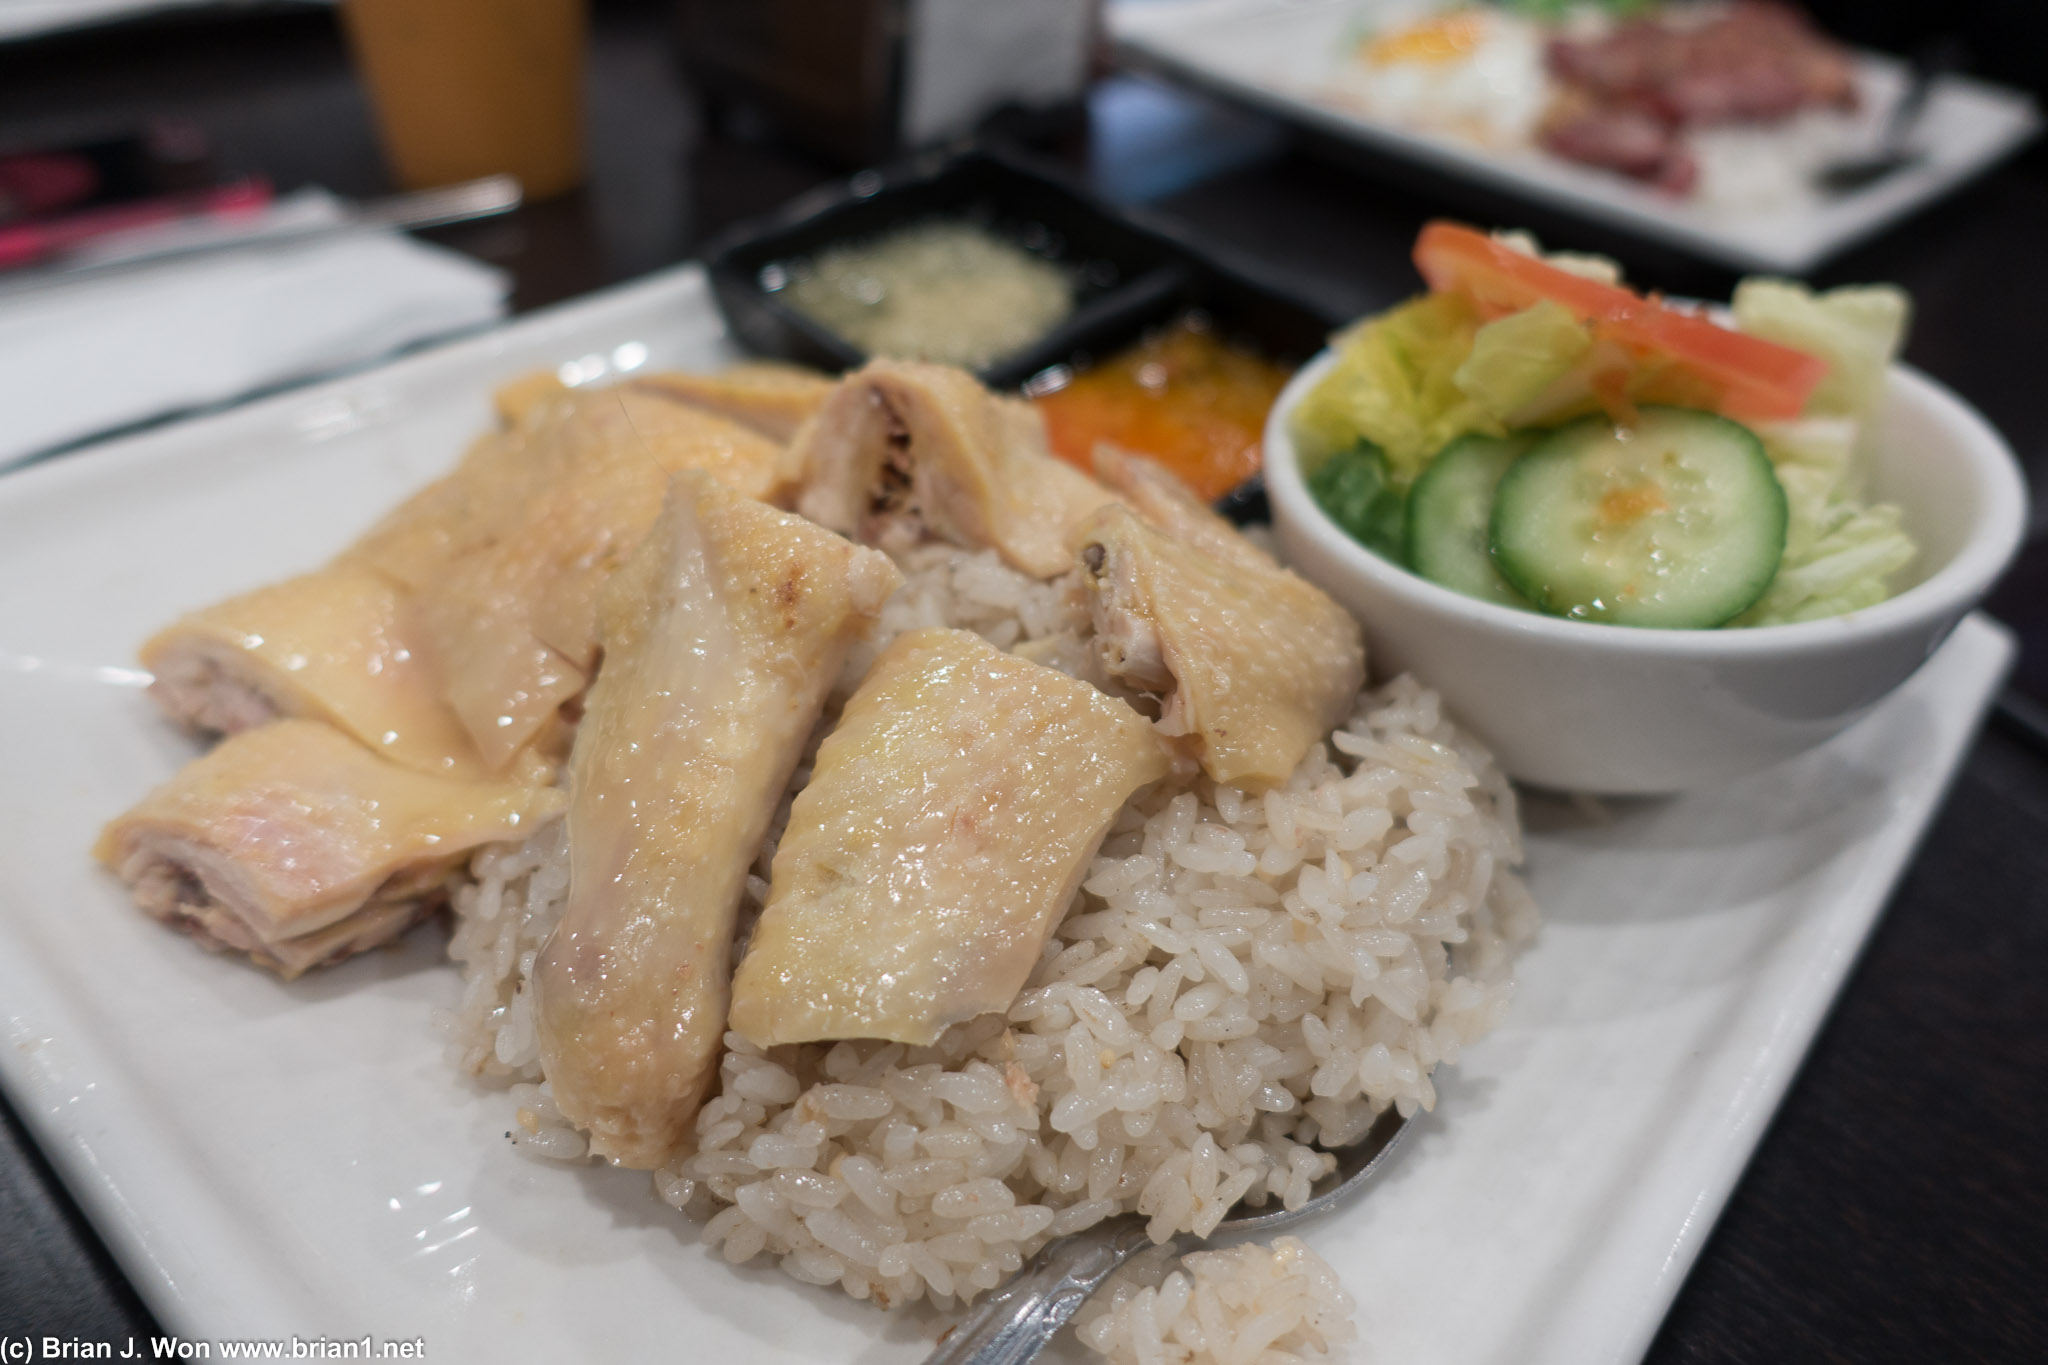 Hainan chicken. Doesn't look as good as Savoy.